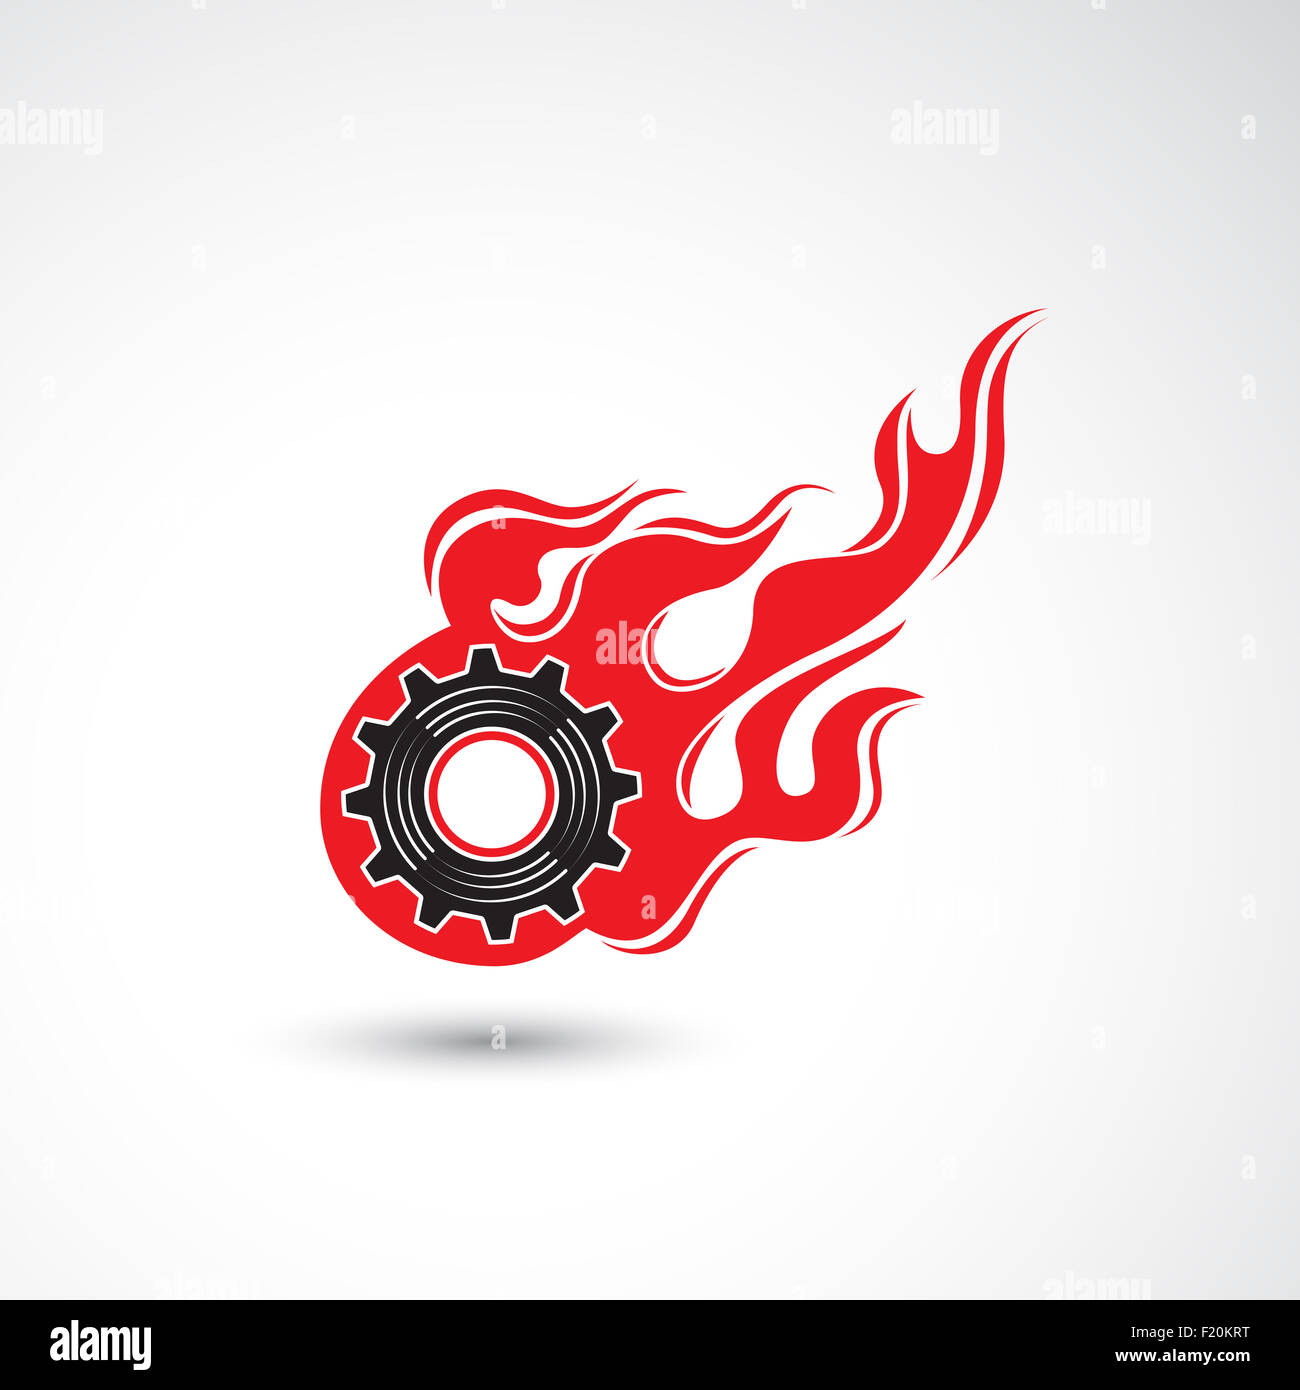 Wheel in Fire flame icon abstract logo design  template. Industrial concept. Corporate creative logotype symbol. Stock Photo